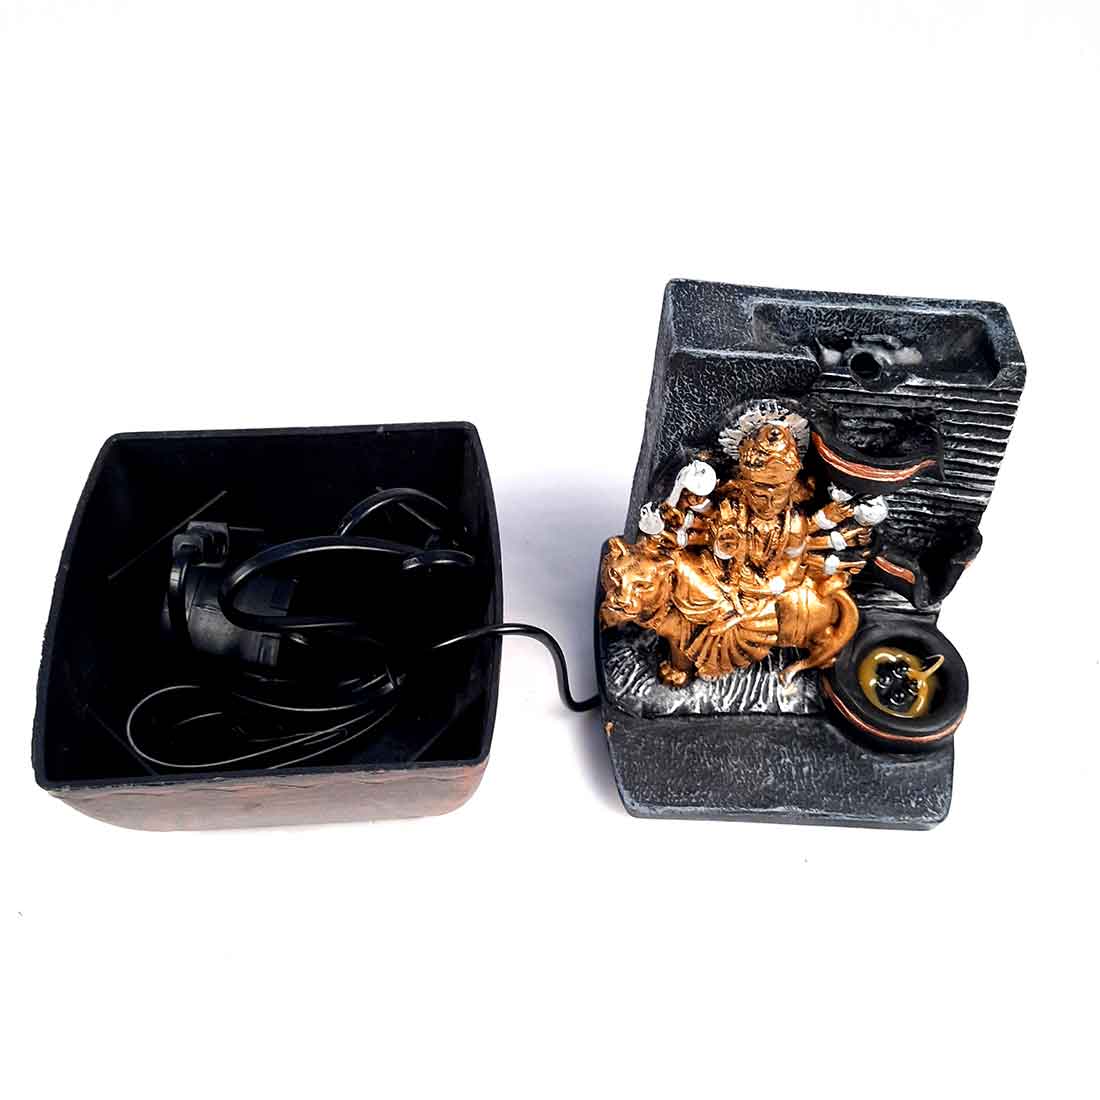 Indoor Water Fountain - Durga Maa LED Water Fountain - for Table Top & Office Decor - 8 Inch - ApkaMart